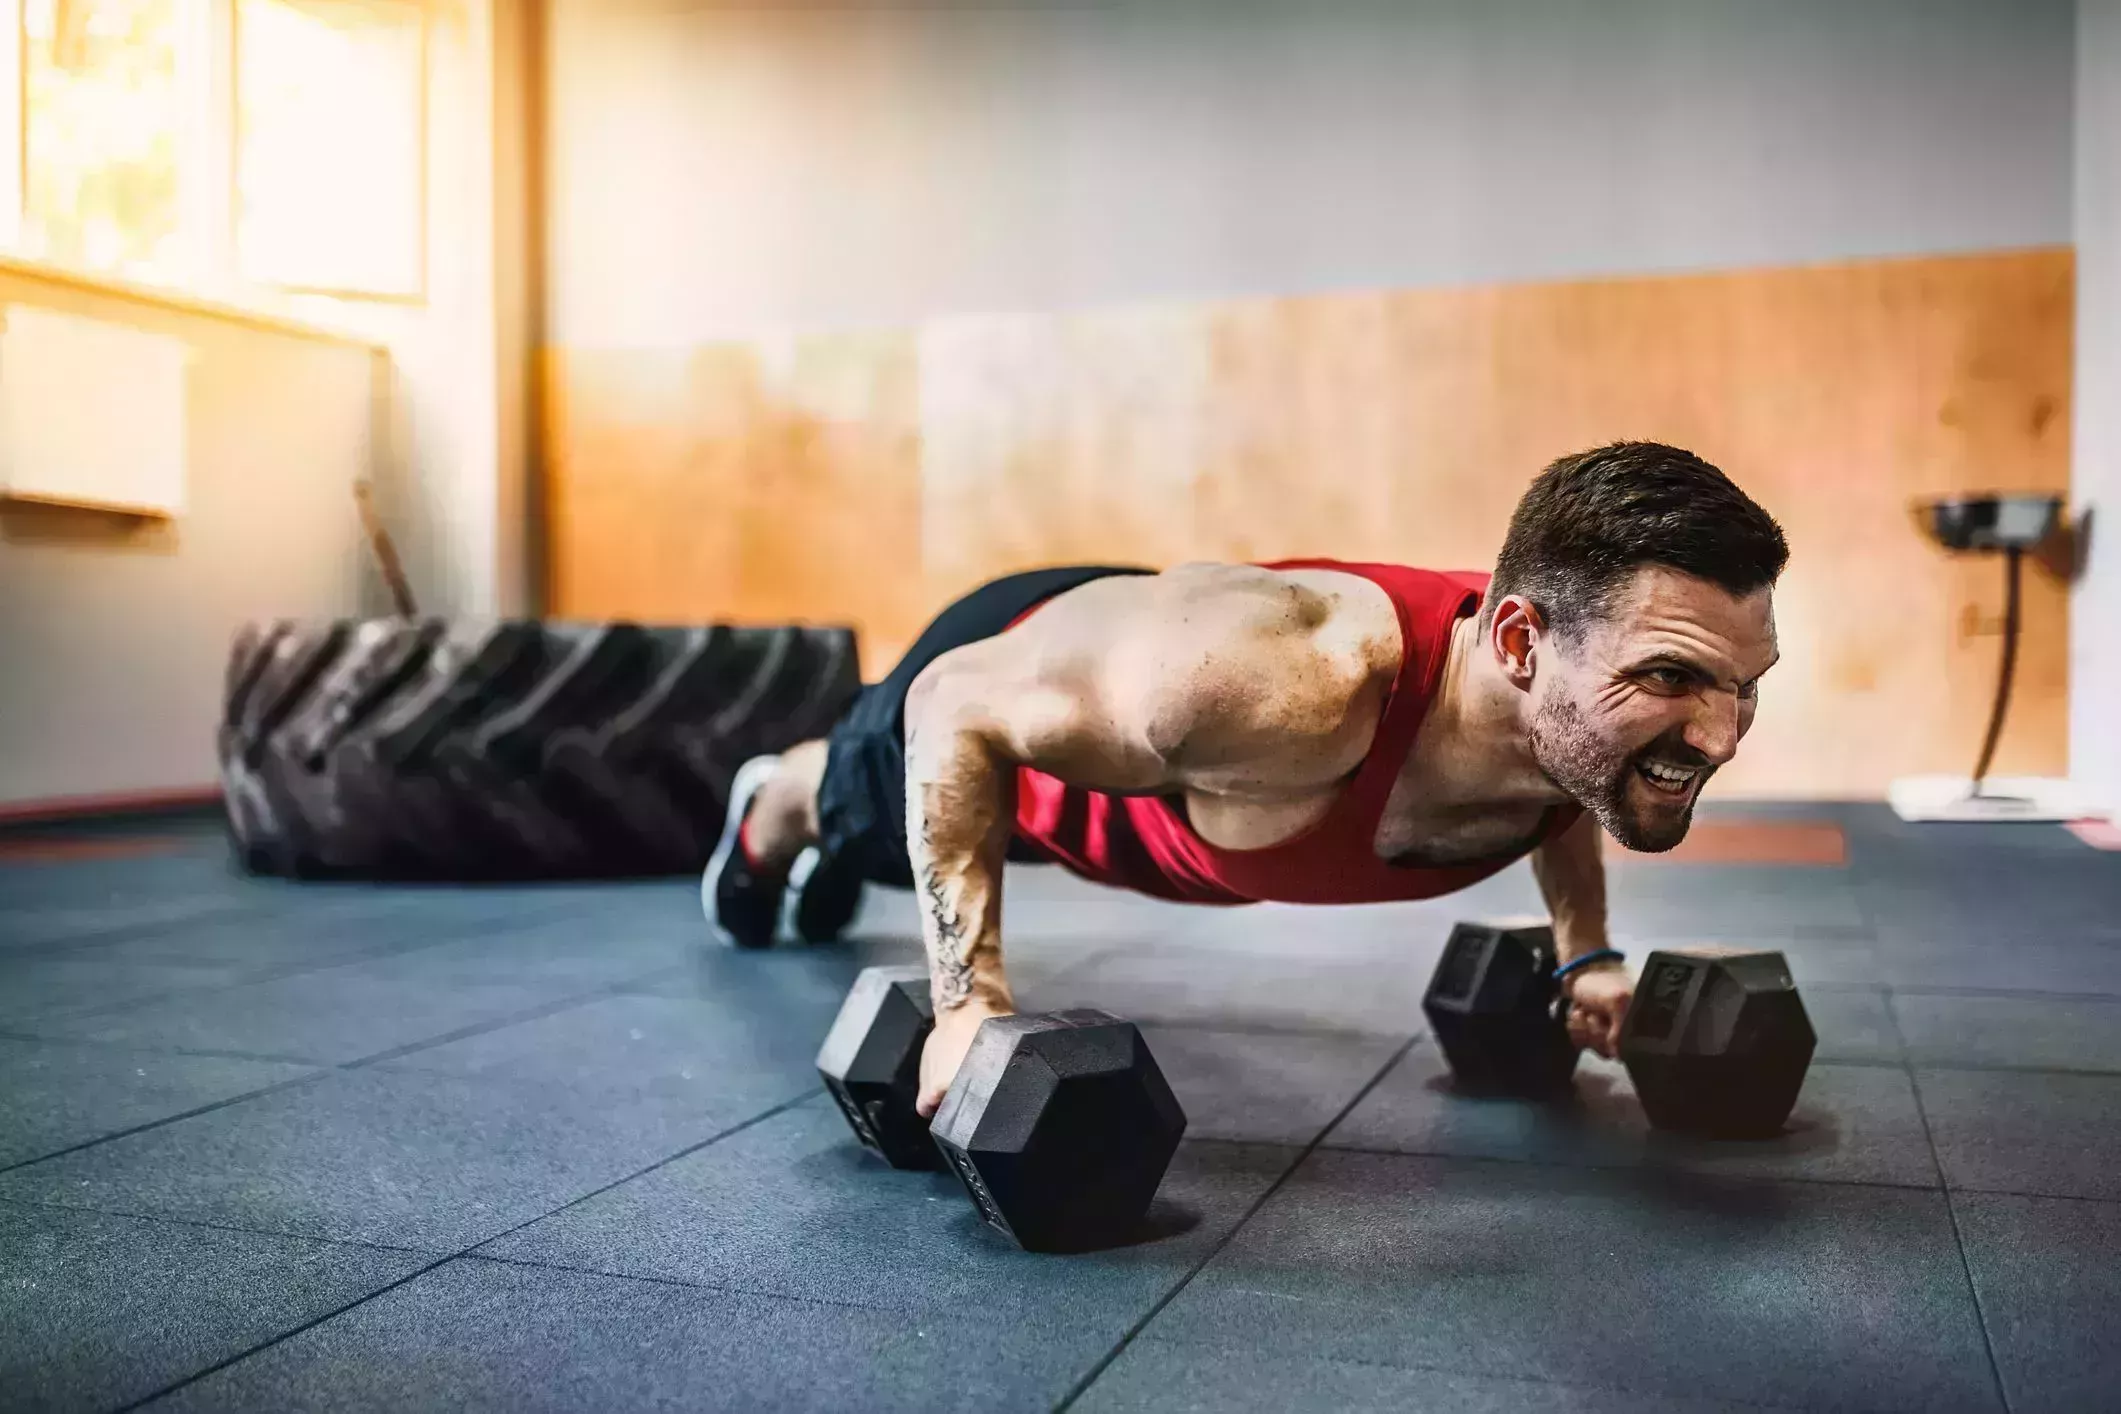 muscular man doing pushup exercise with dumbbell